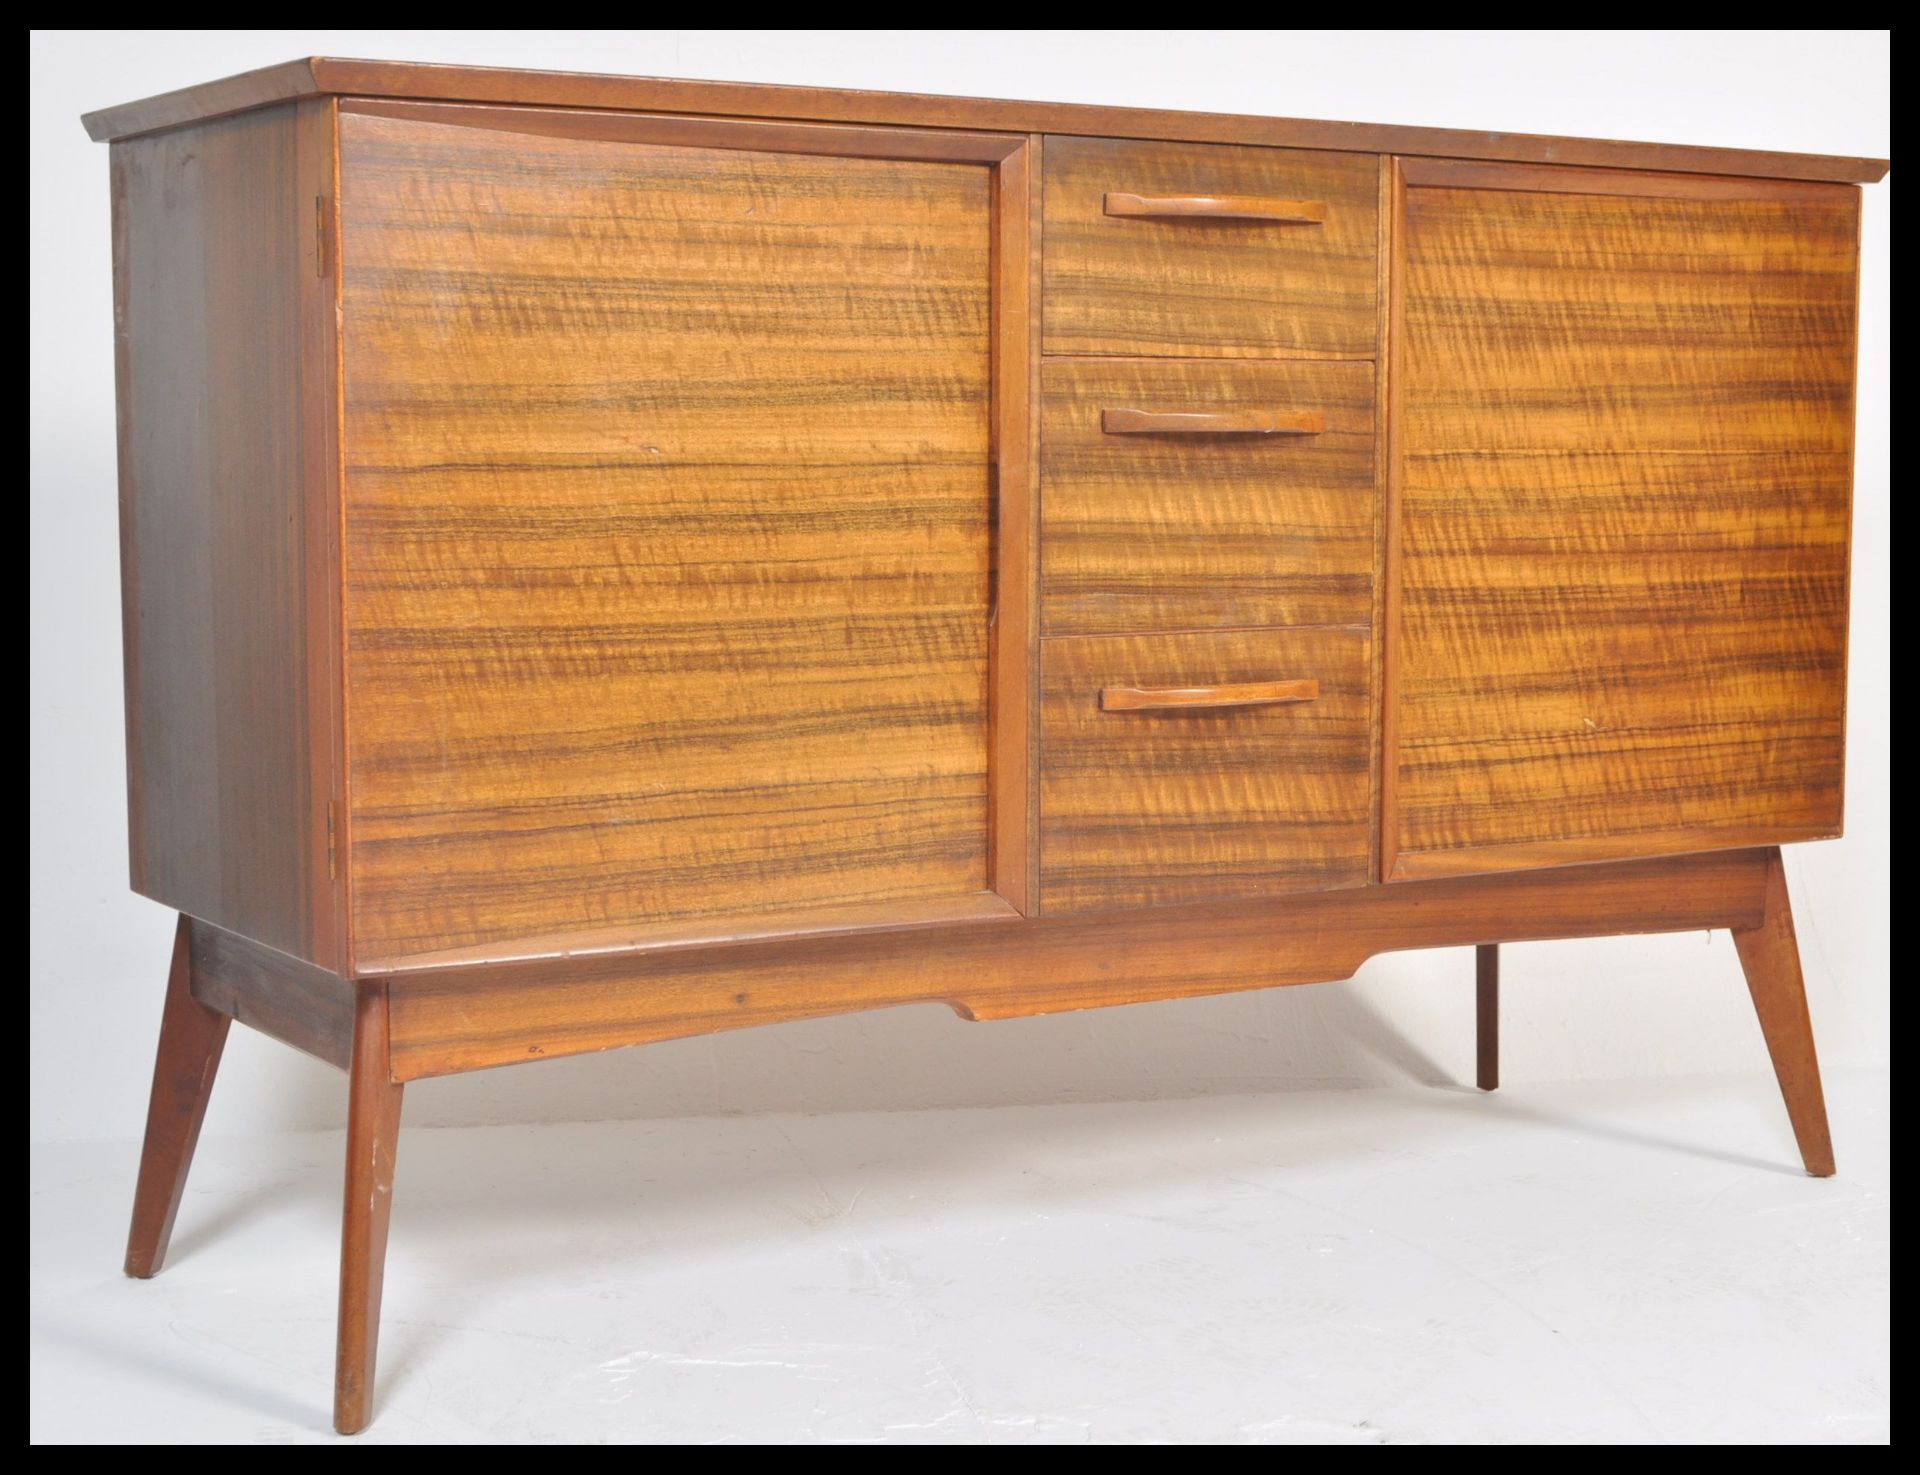 Alfred Cox - A  vintage 20th century oak sideboard credenza having a central bank of 3 drawers